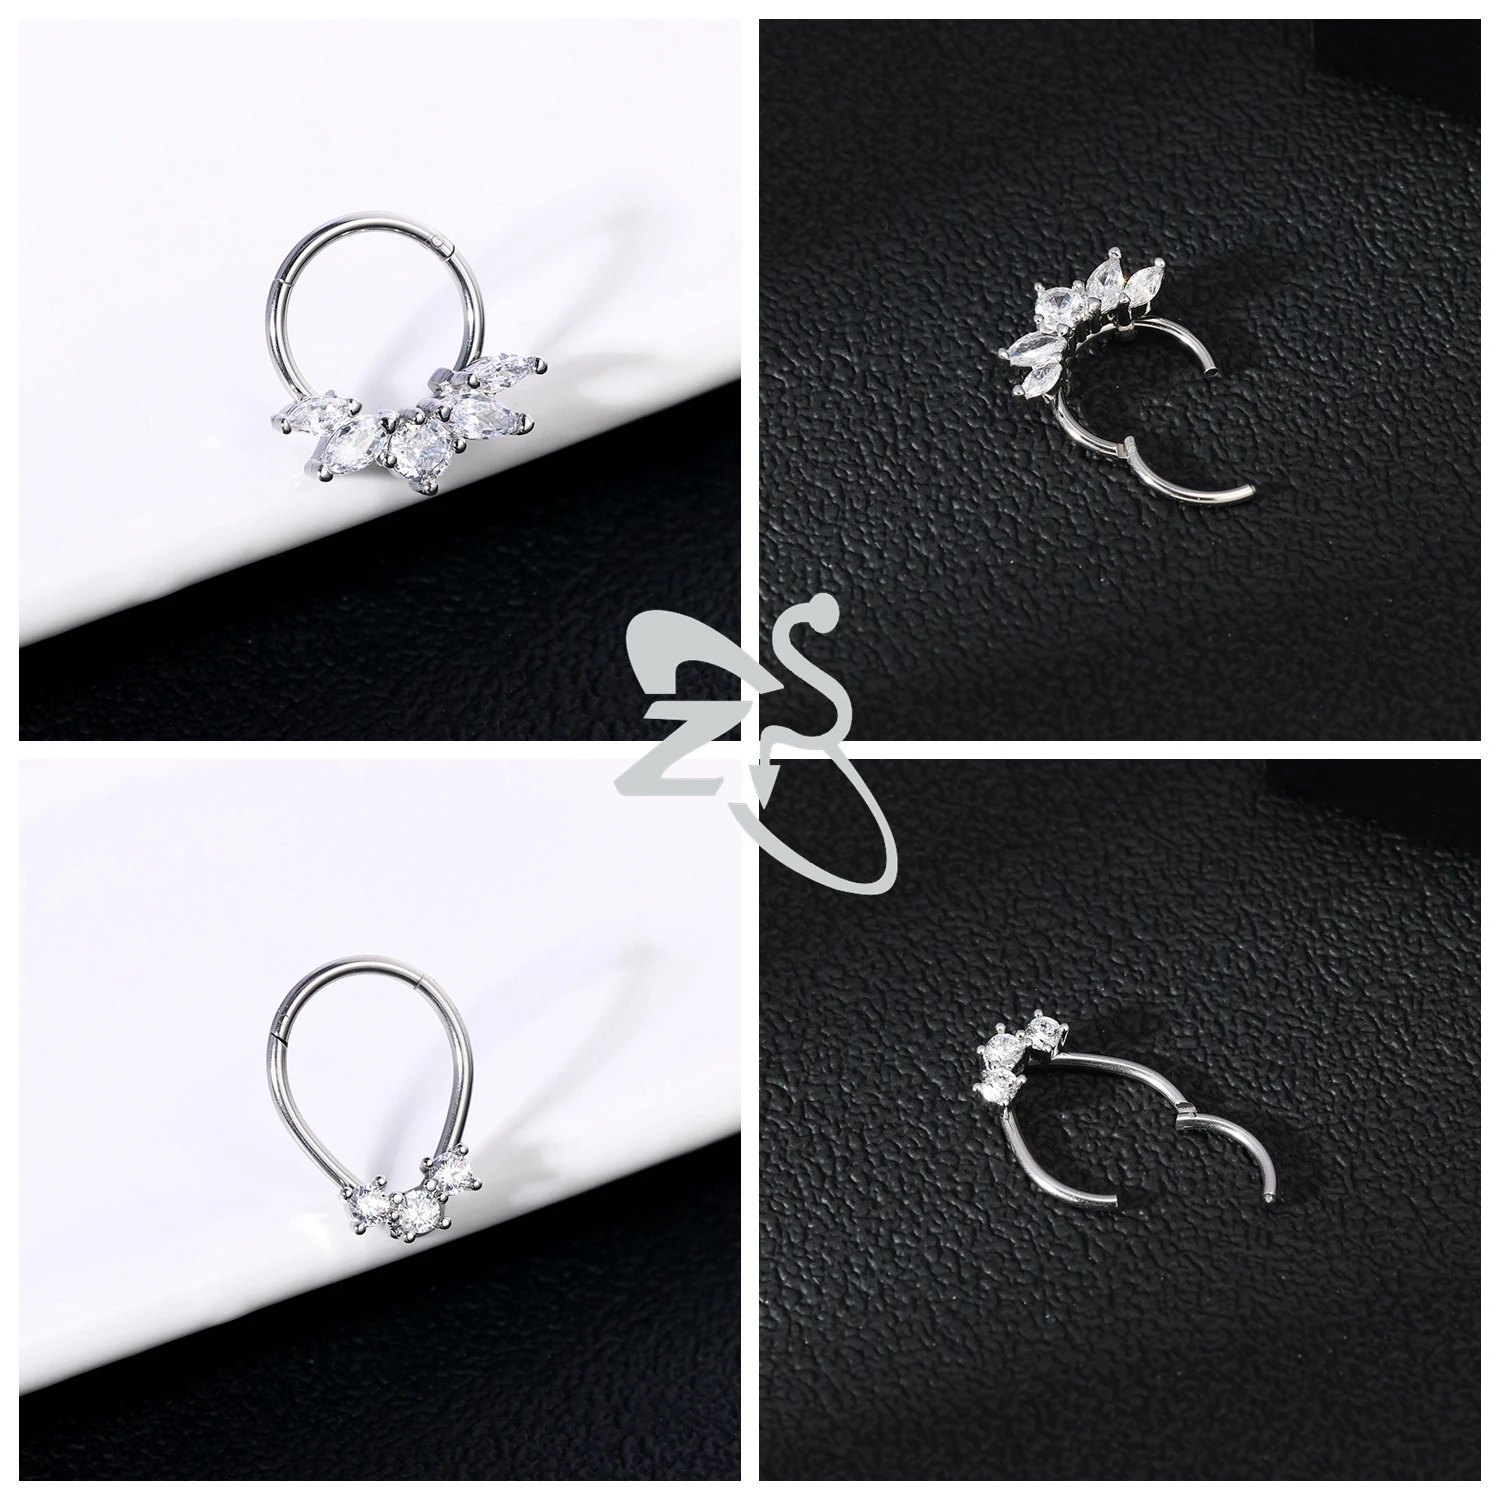 ZS 1 Piece Cute 16G Stainless Steel Septum Ring Spider Web Heart Nostril Piercing CZ Crystal Ear Helix Cartilage Earring Jewelry